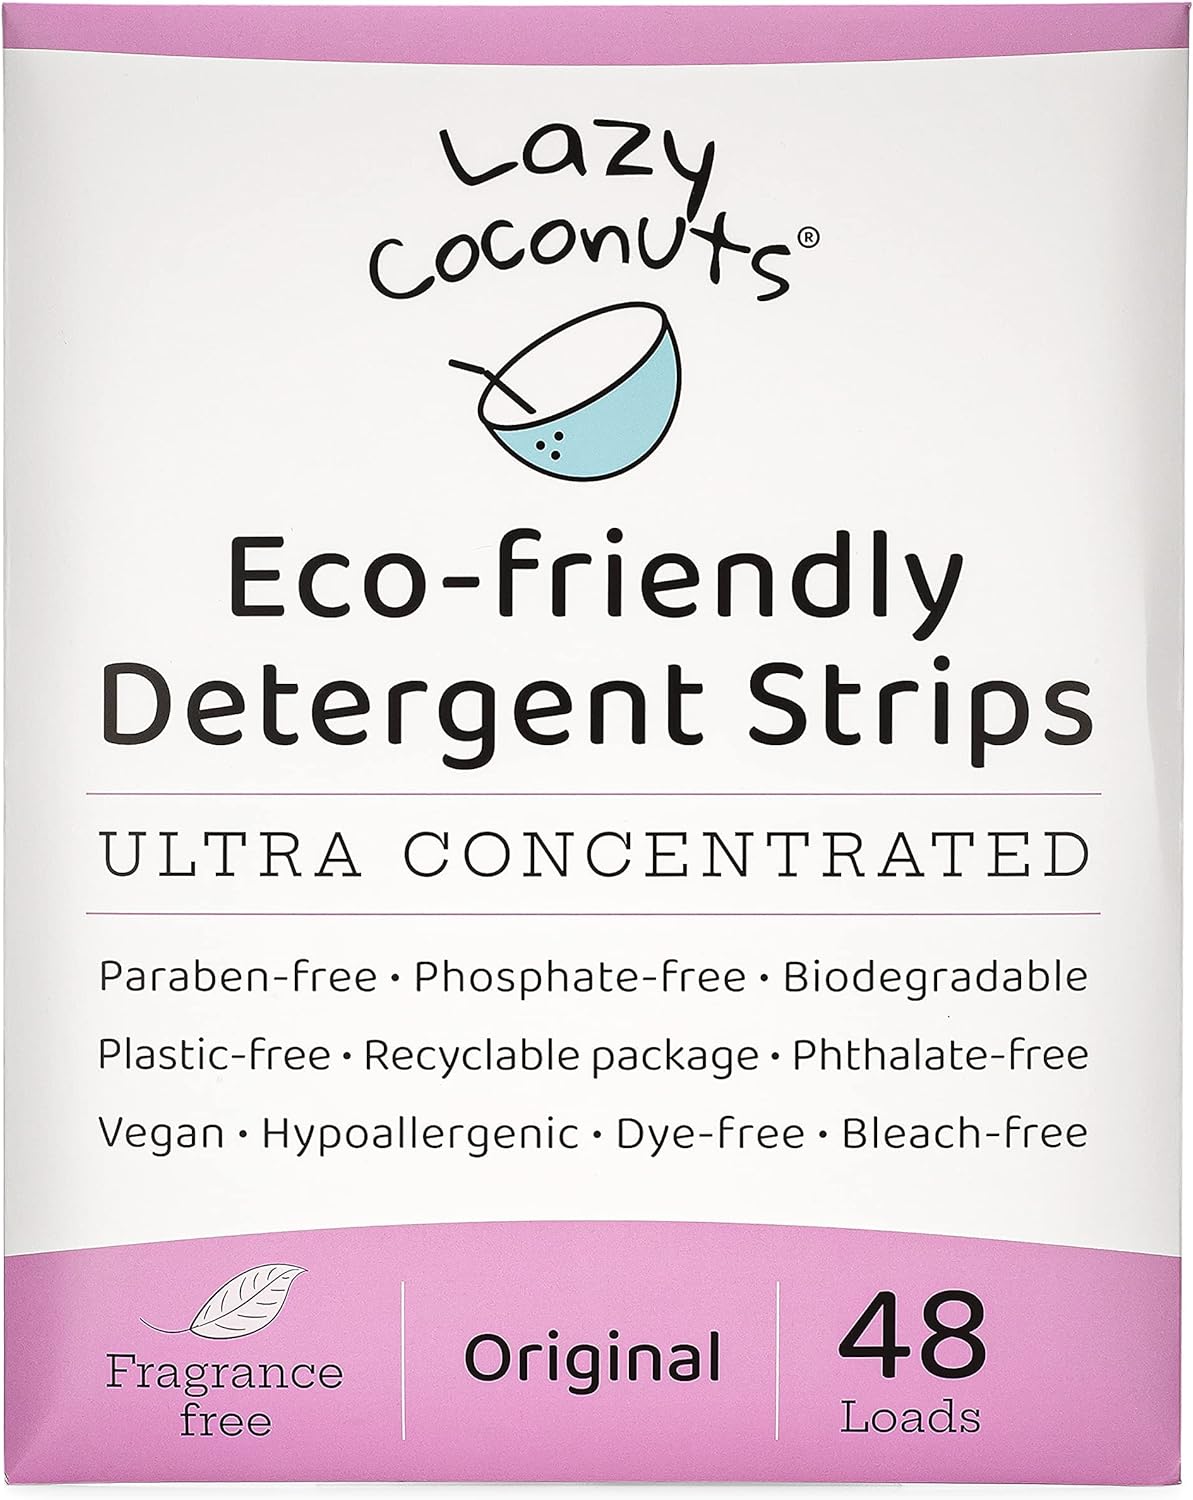 Eco Friendly, Plant Powered Laundry Detergent Strips - Fragrance Free, Unscented, Ultra Concentrated, Earth Friendly No Plastic - Lightweight and Perfect For Home, Dorms, Travel, Camping